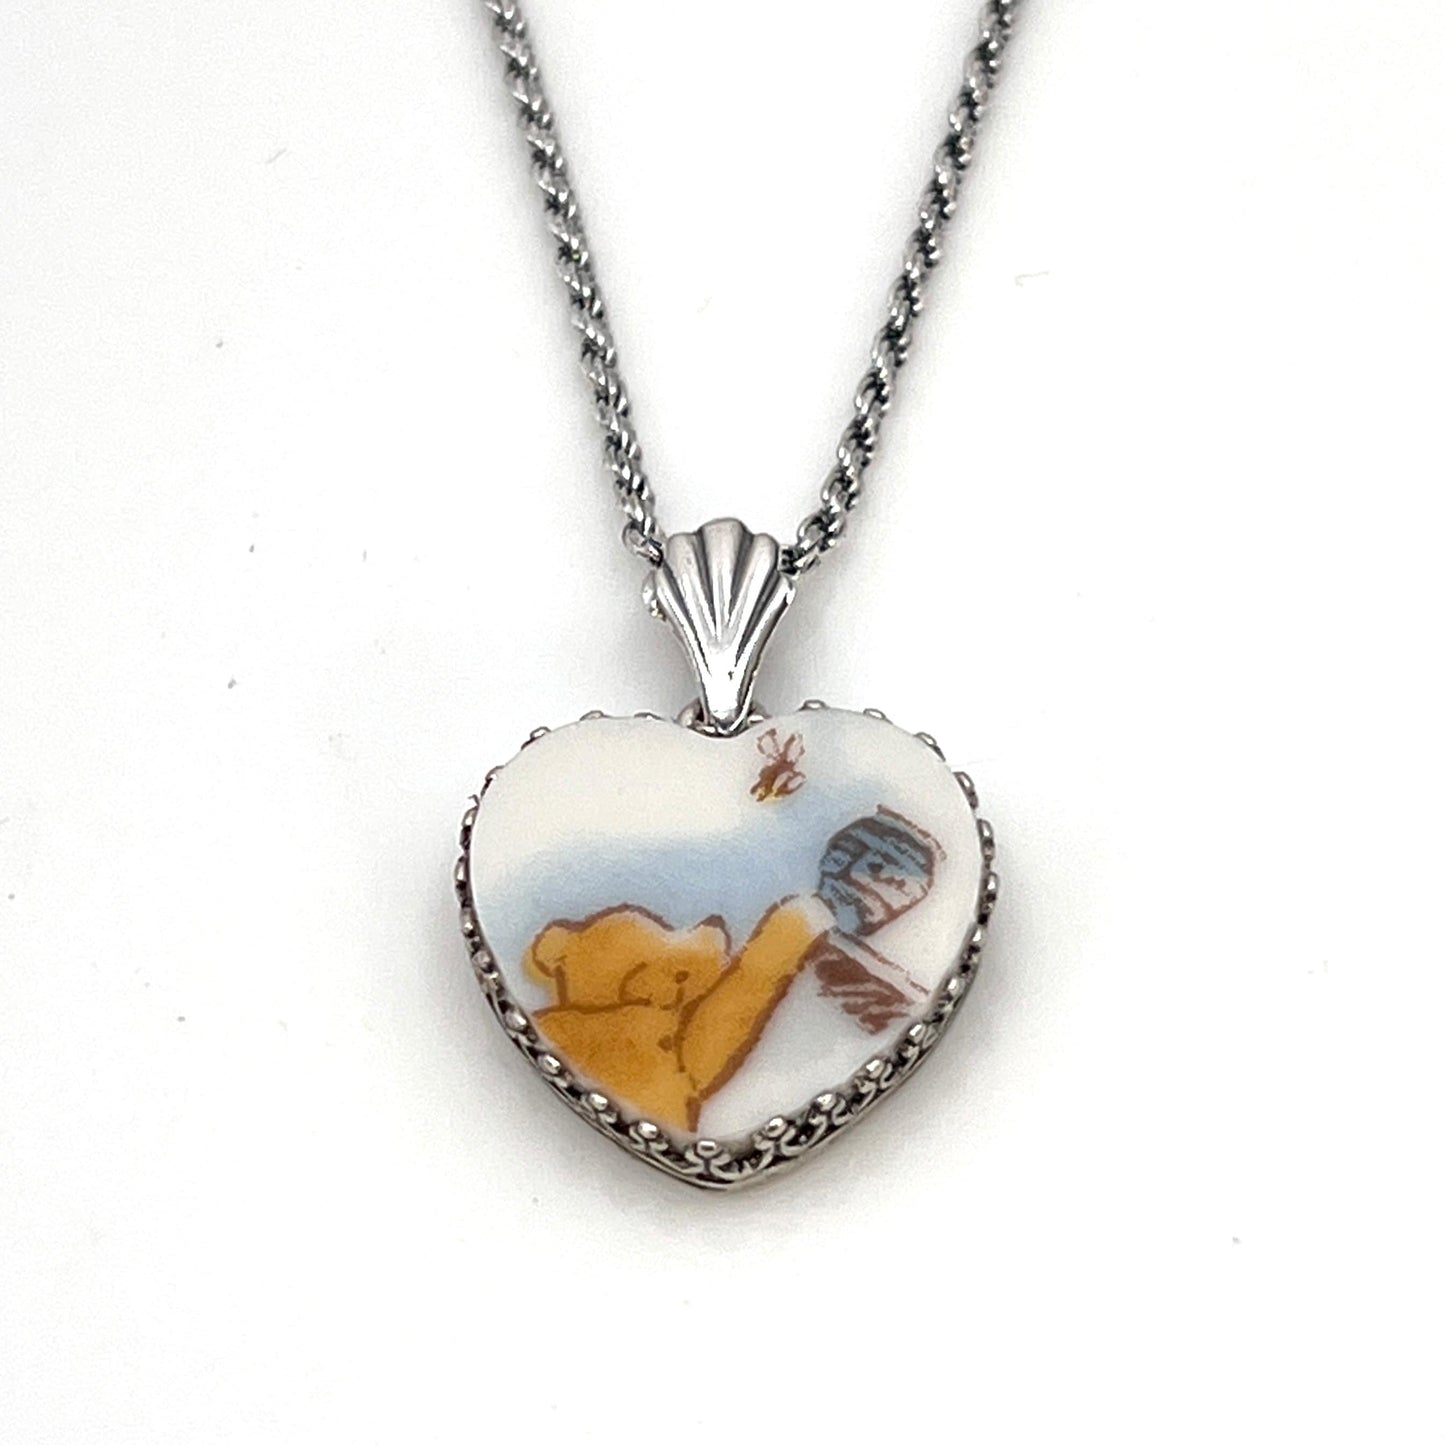 Winnie the Pooh Heart Necklace, Sterling Silver Necklace, Unique Gifts for Women, Broken China Jewelry Christmas Gift